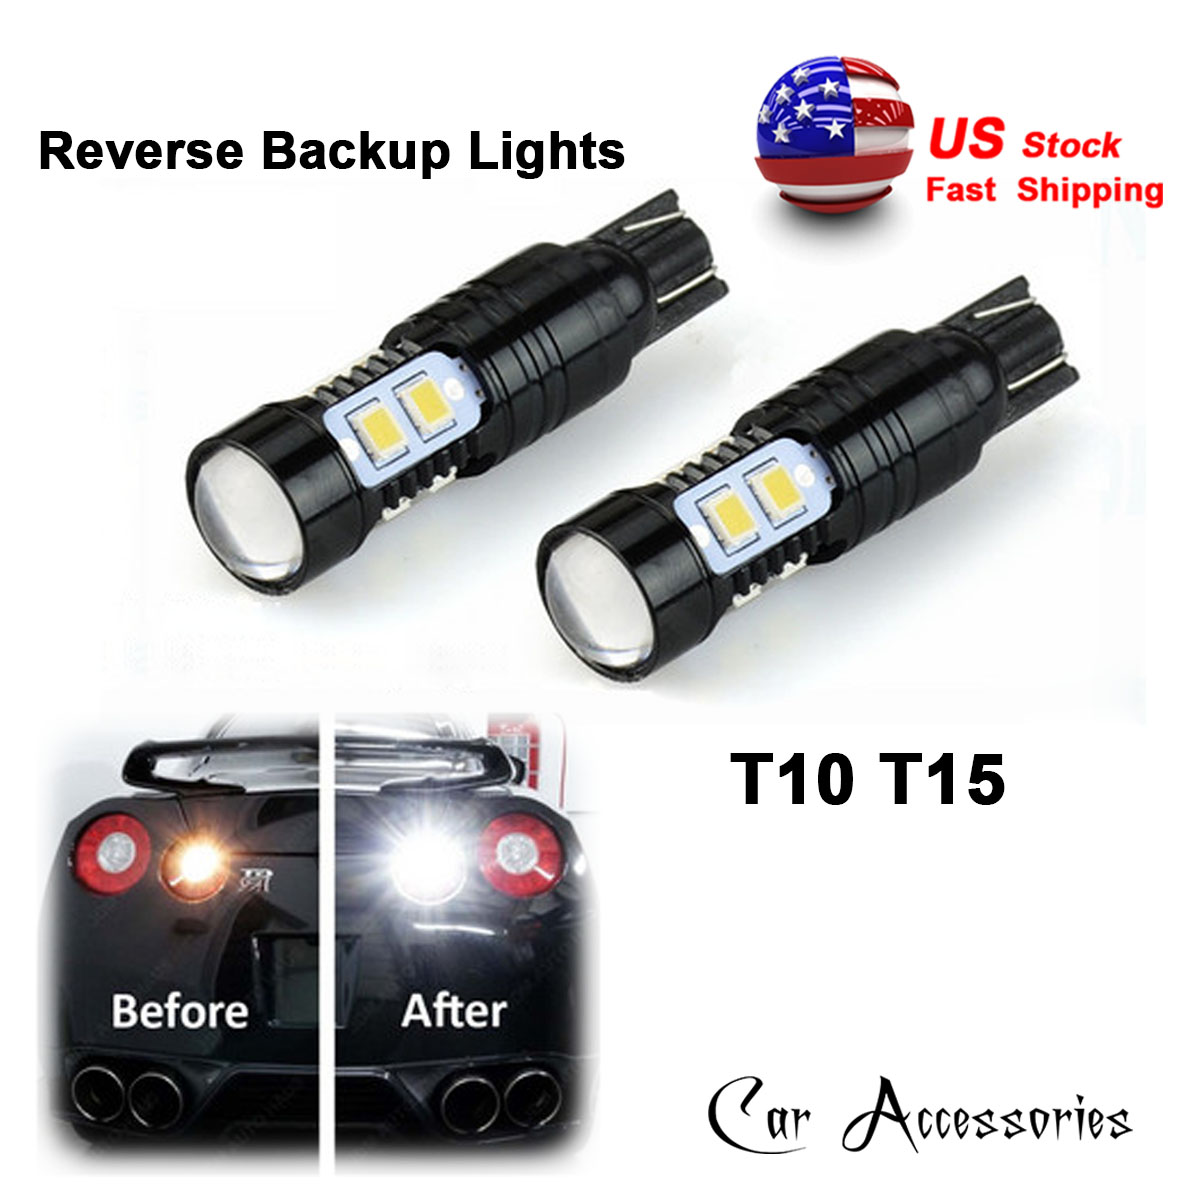 Details about   2pcs of T10 Wedge LED Backup Reverse 5 Flux Blue Light Bulbs One Pair 921 912